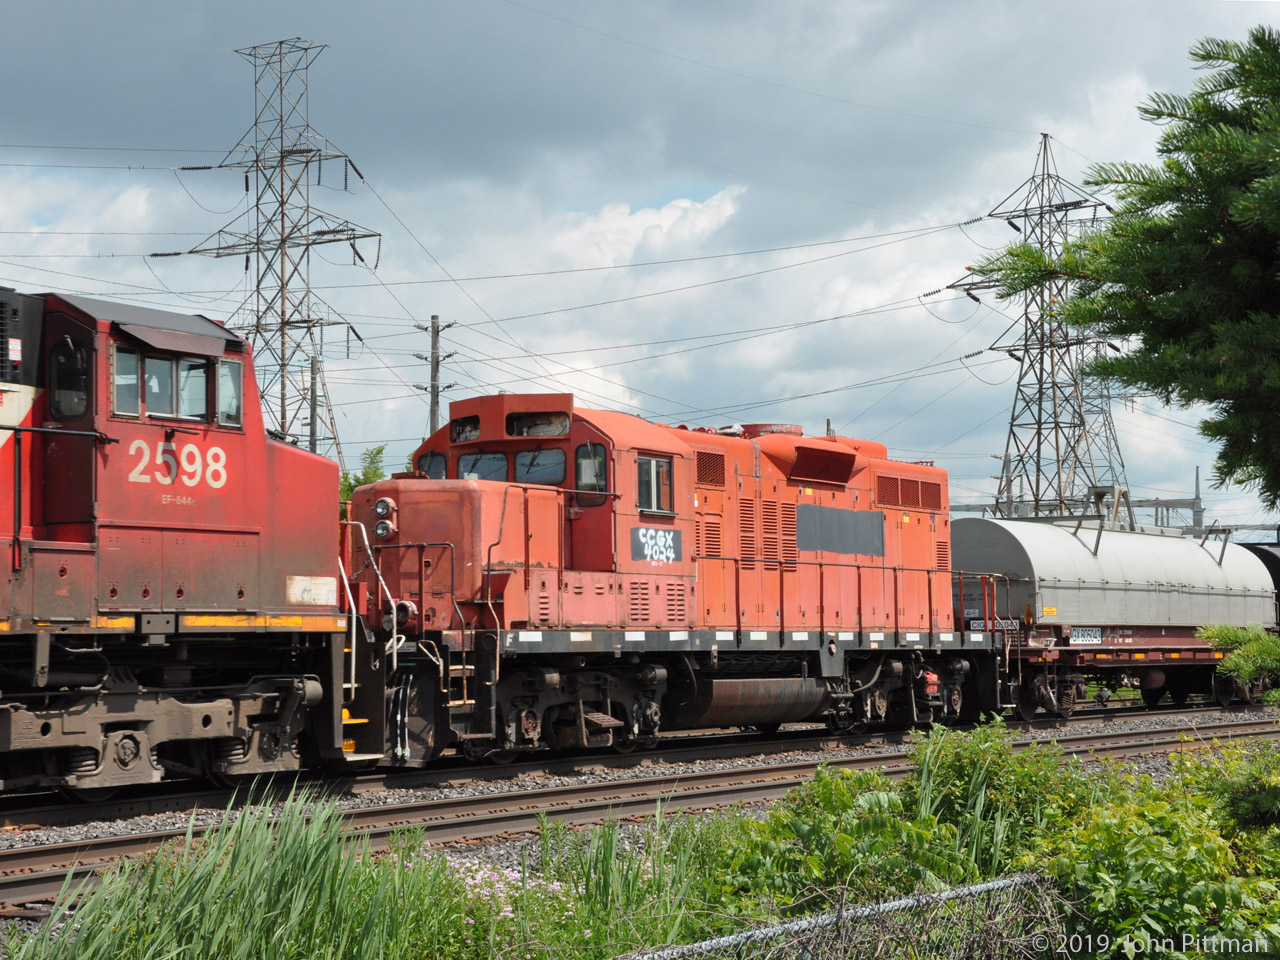 CCGX 4024 could be getting a reprieve from the fate of most of its siblings in CP's GP9 fleet.
It was seen westbound near CN Aldershot East behind the active locos of a CN mixed freight train on 25 June 2019 at 11:36 EDT.  Powering the train were GE's CN 2233, CN 2511, and CN 2598.